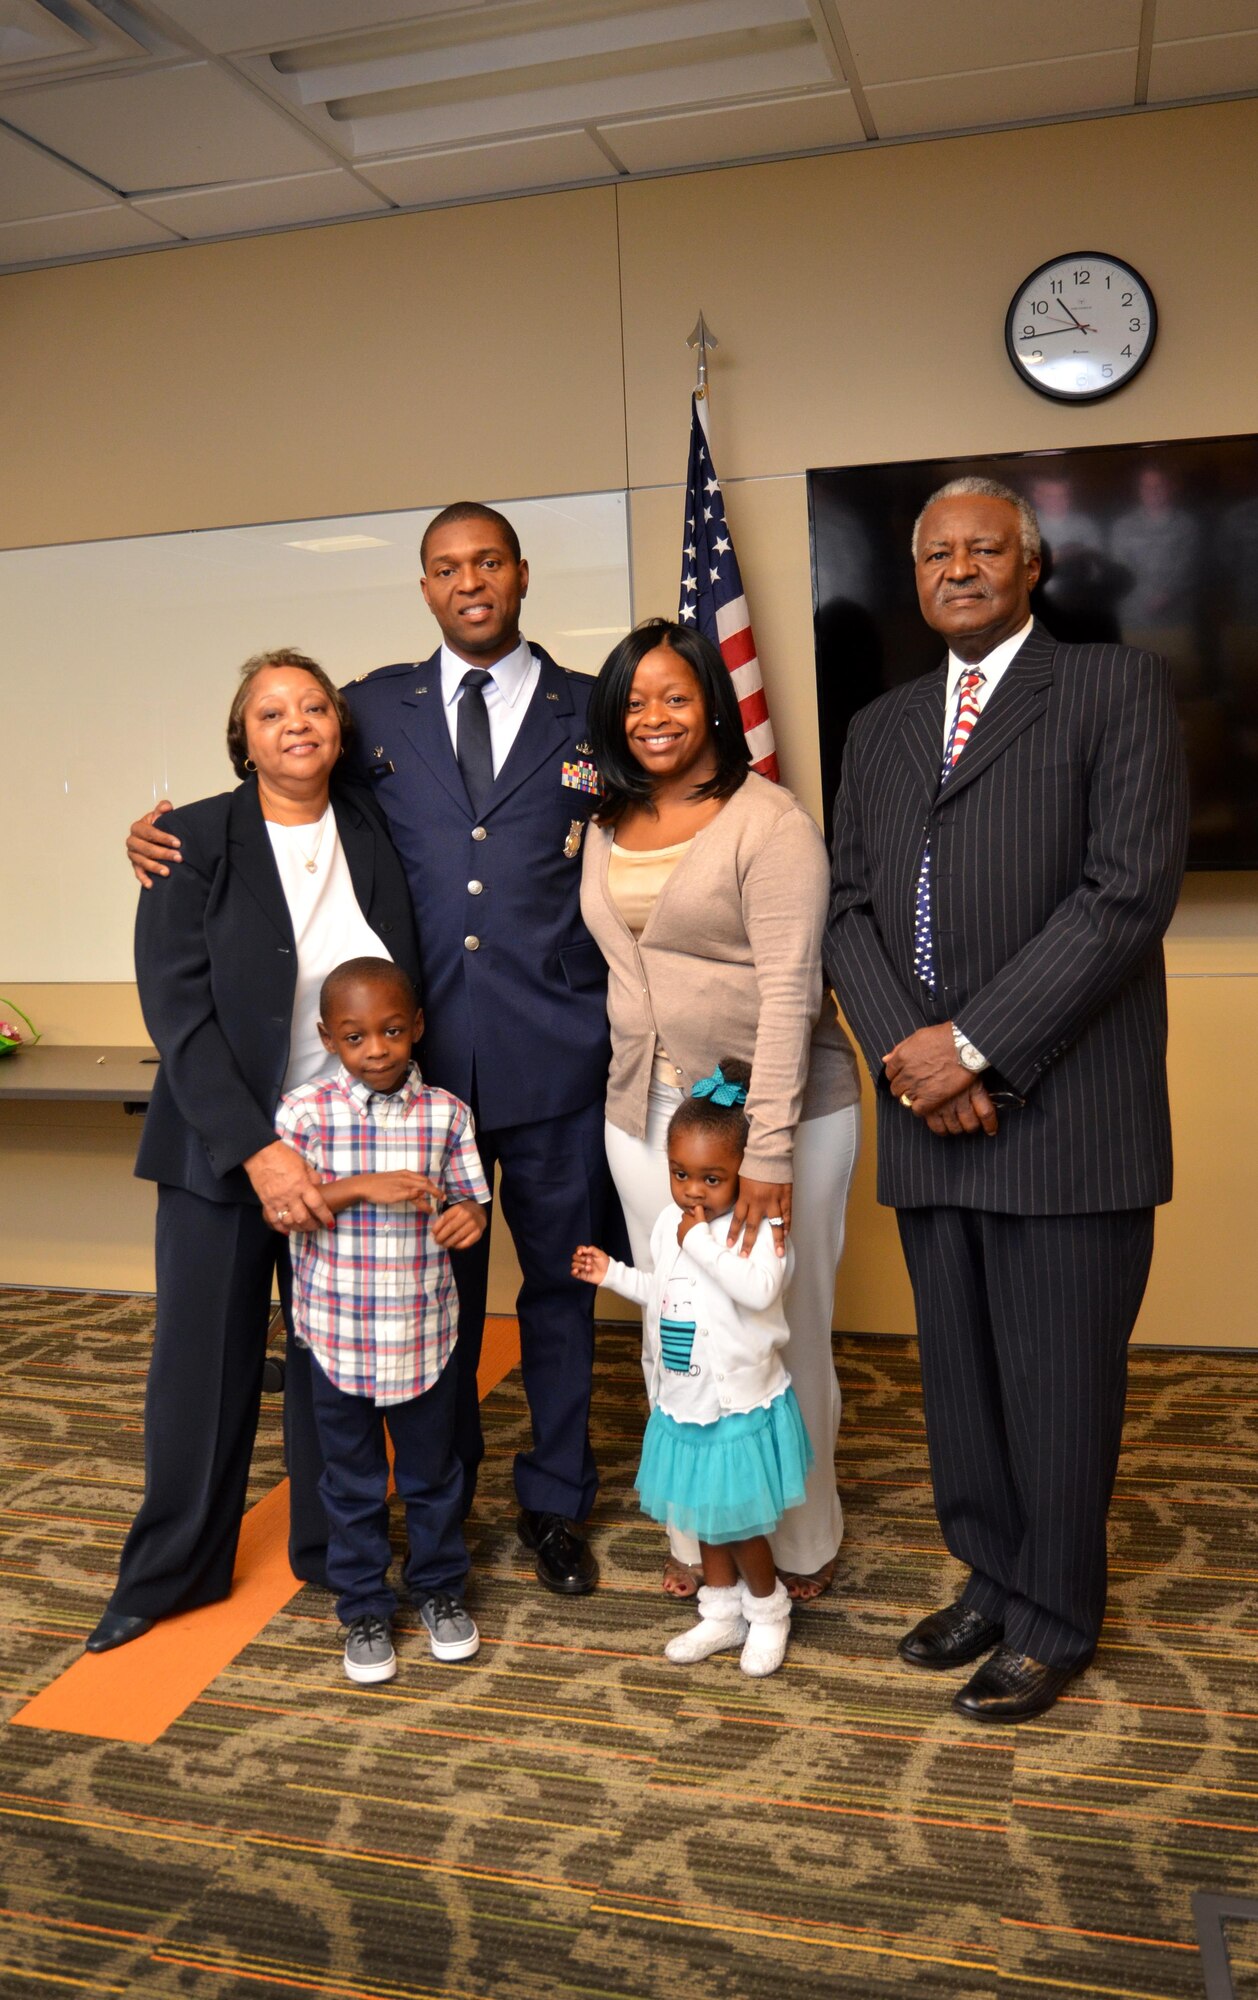 Newly promoted Lt. Col. Andre Wright, 94th Civil Engineer Squadron, stands with his family after his ceremony of promotion at Dobbins Air Reserve Base on October 15, 2016. Wright’s father, a retired Air Force chief, delivered the invocation and his family pinned on his new rank. (U.S. Air Force photo by Senior Airman Lauren Douglas)